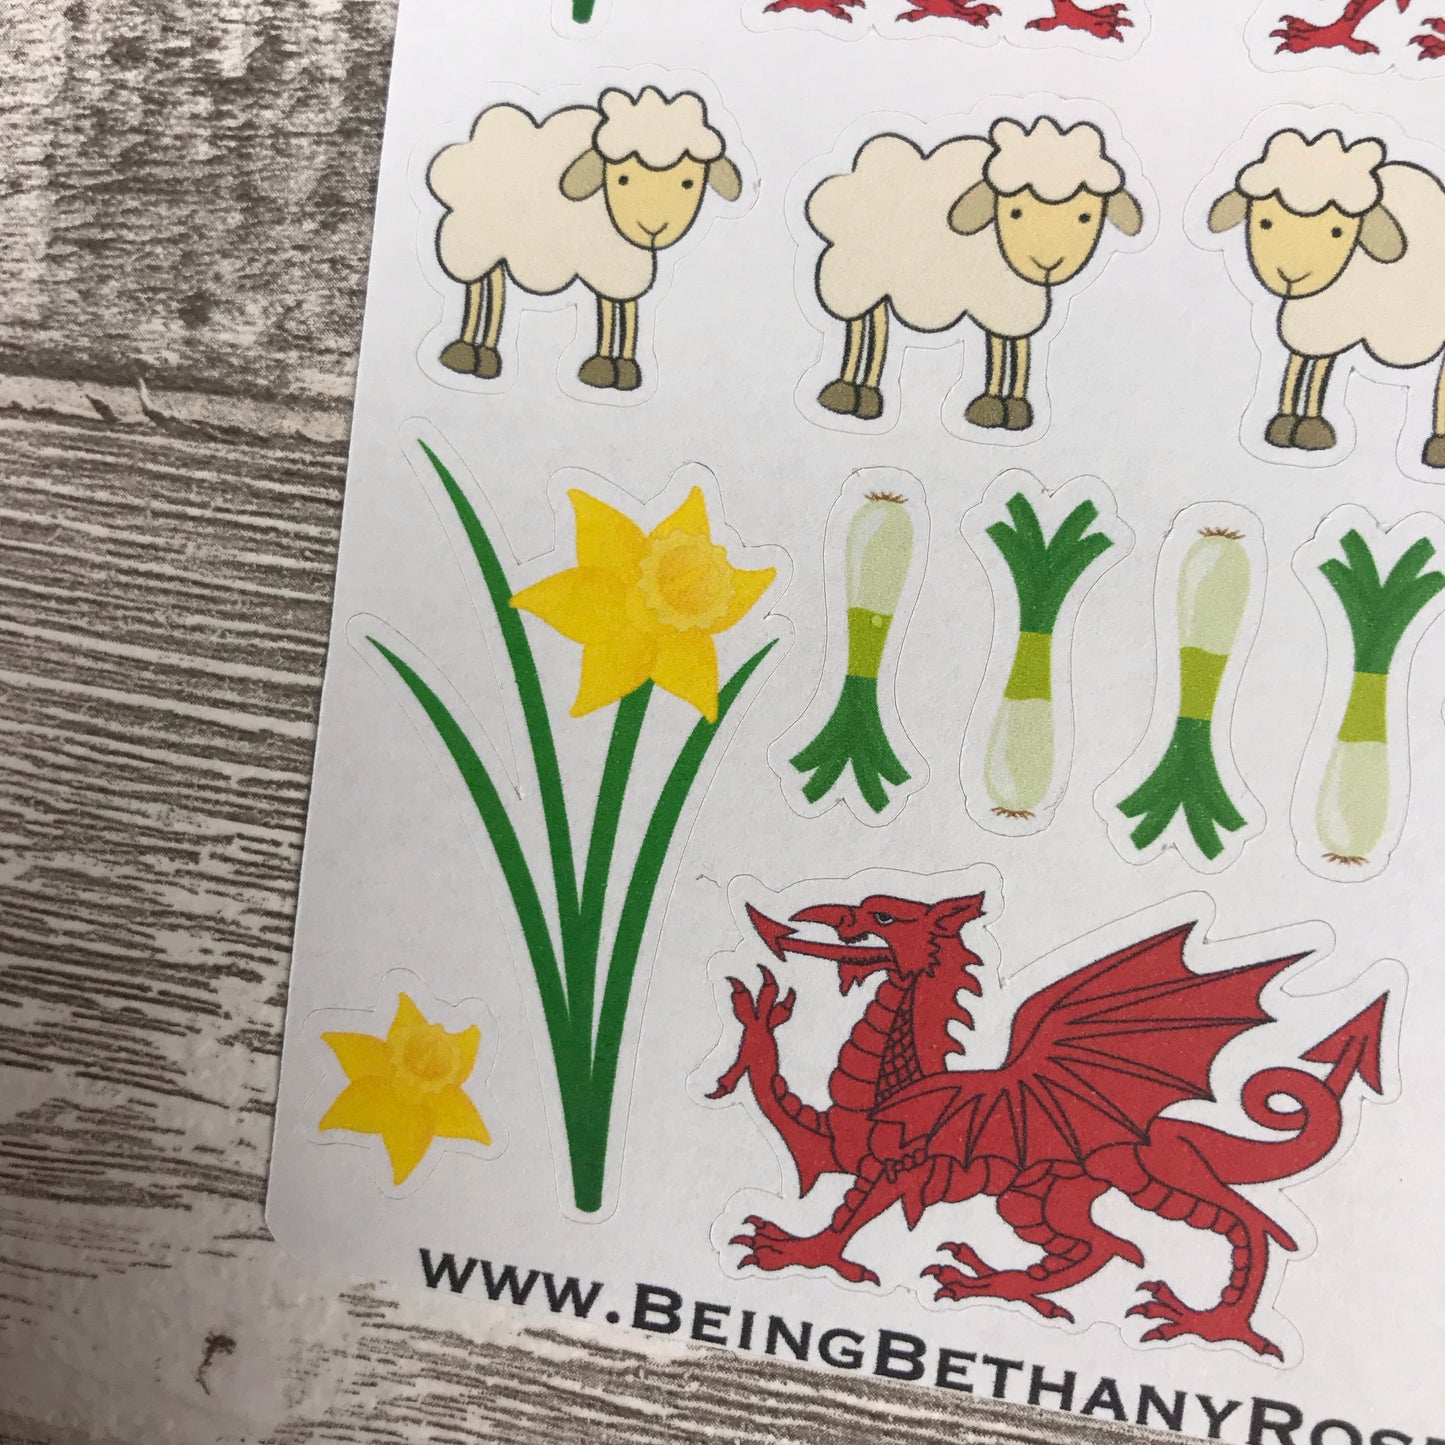 St David's Day / Wales stickers (DPD509)